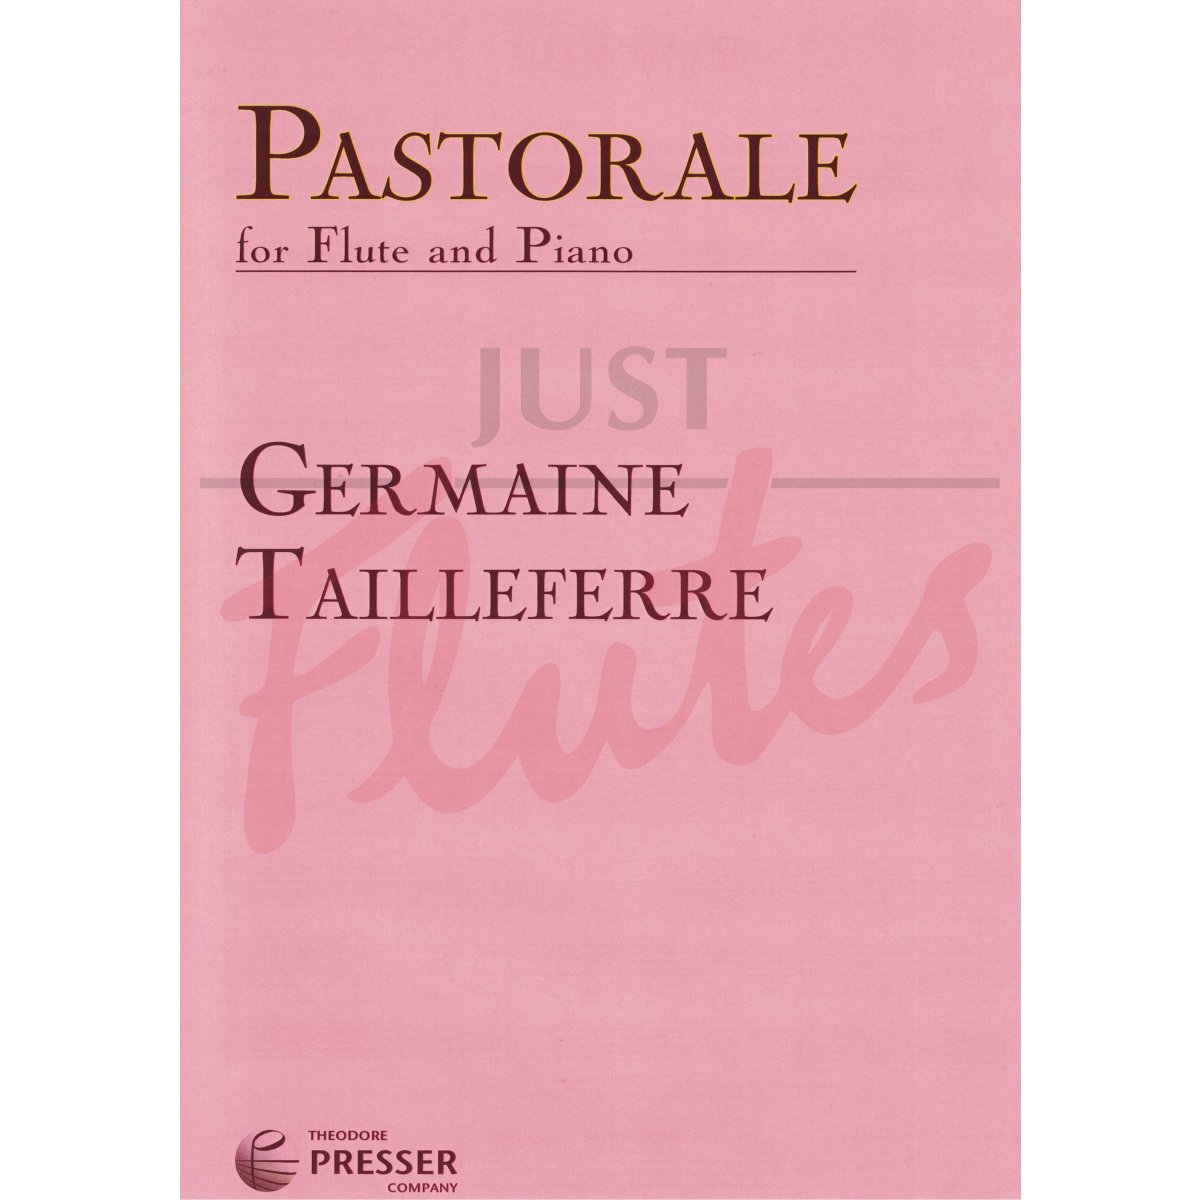 Pastorale for Flute and Piano